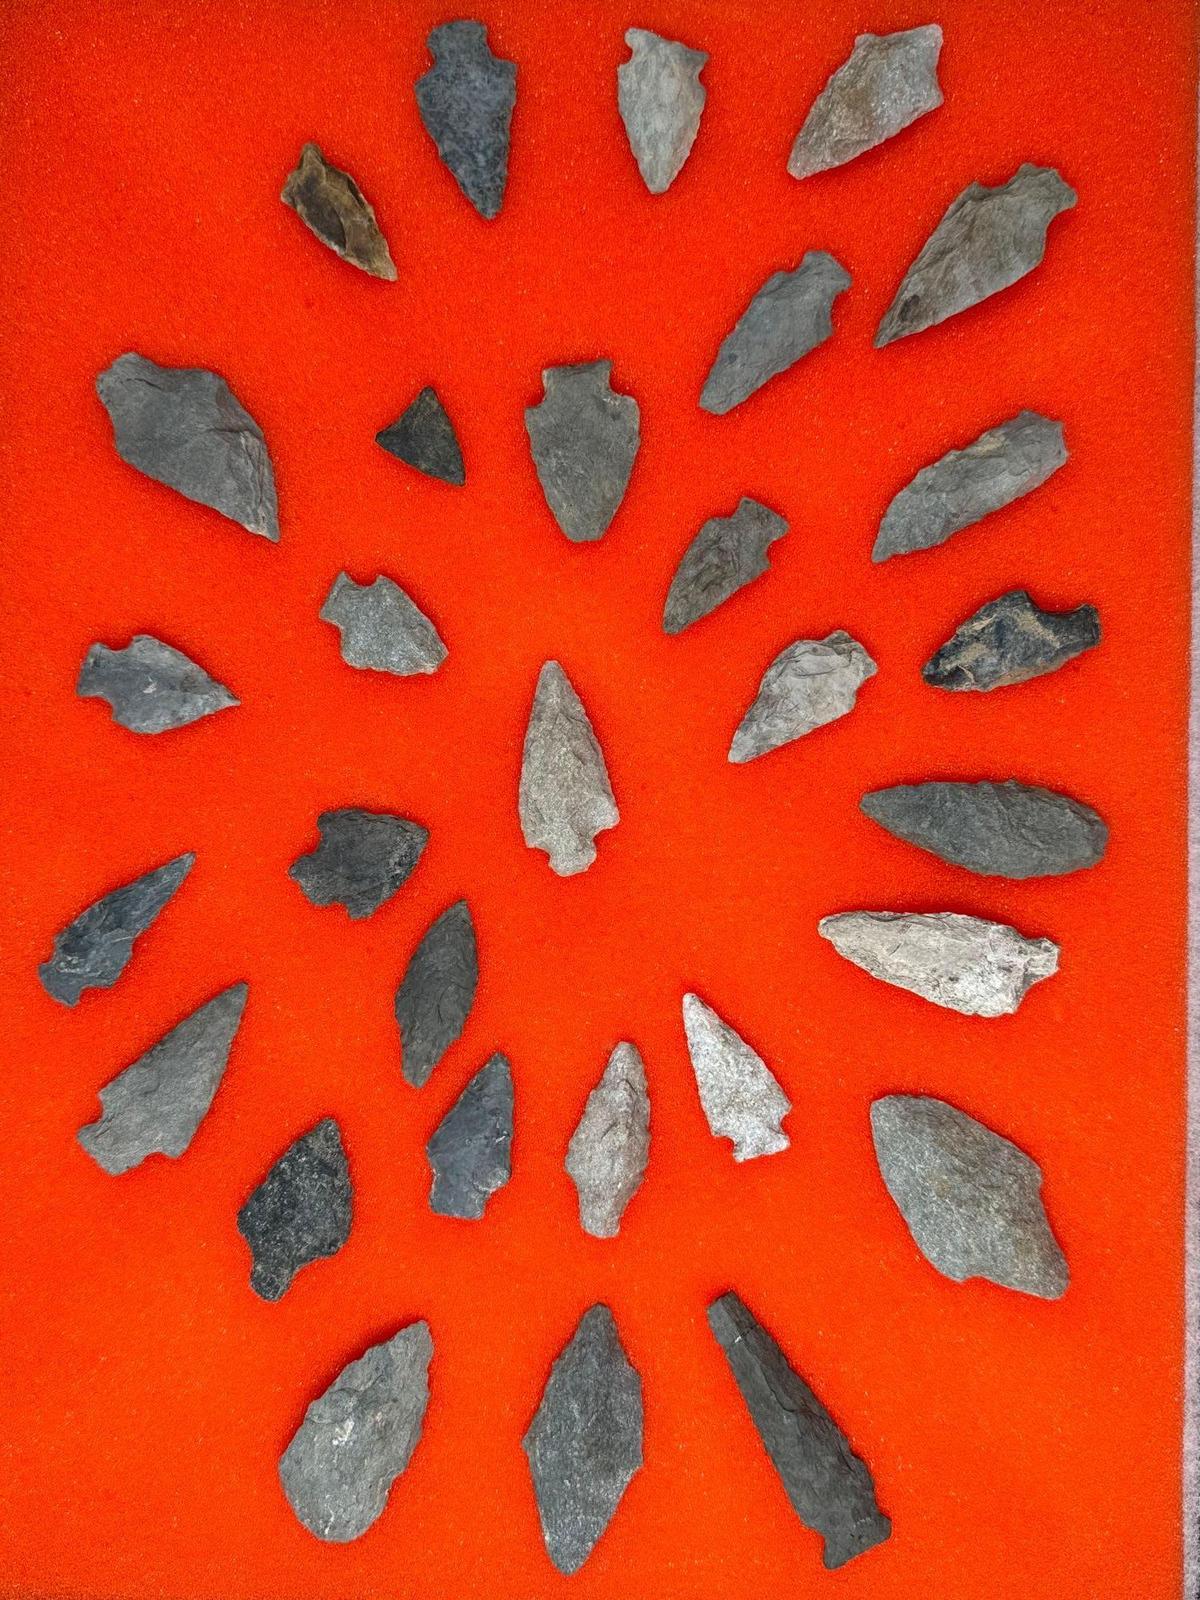 30 Arrowheads, Points Found in Jim Thorpe Area in Pennsylvania, Longest is 2 1/2"